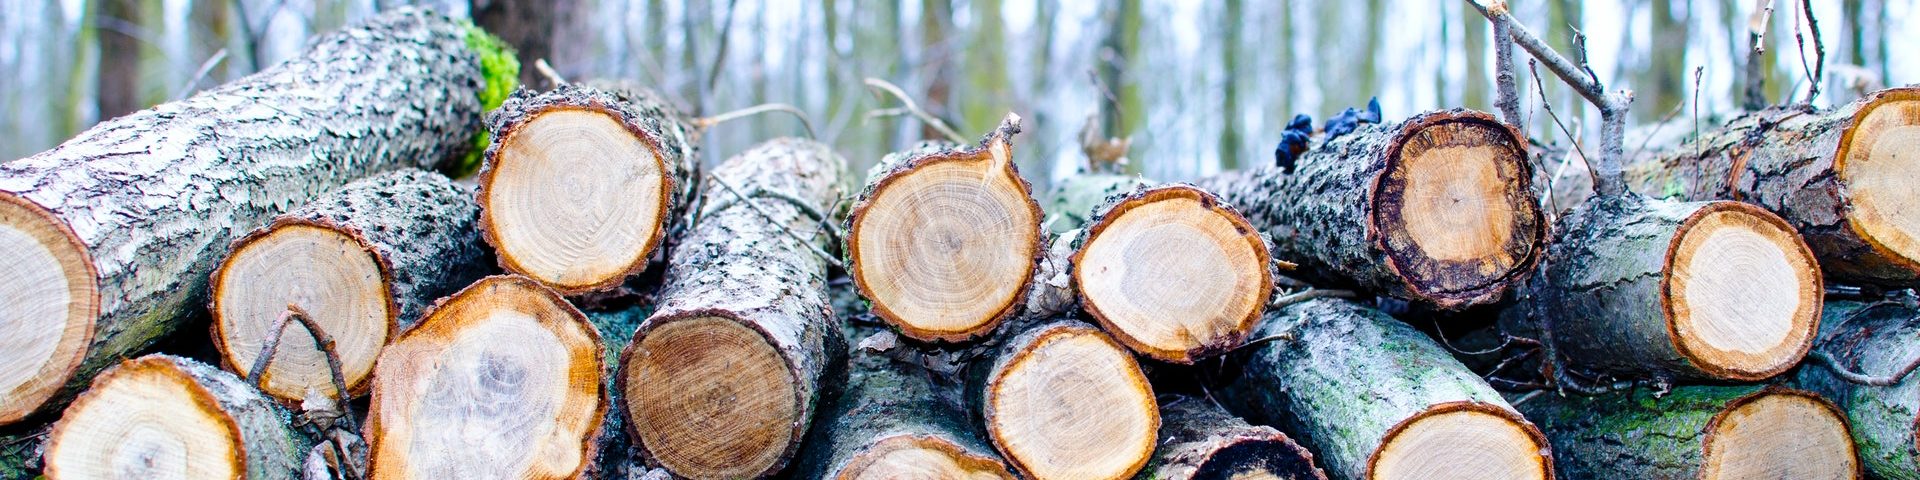 6 Important Reasons to Have Trees Professionally Cut Down